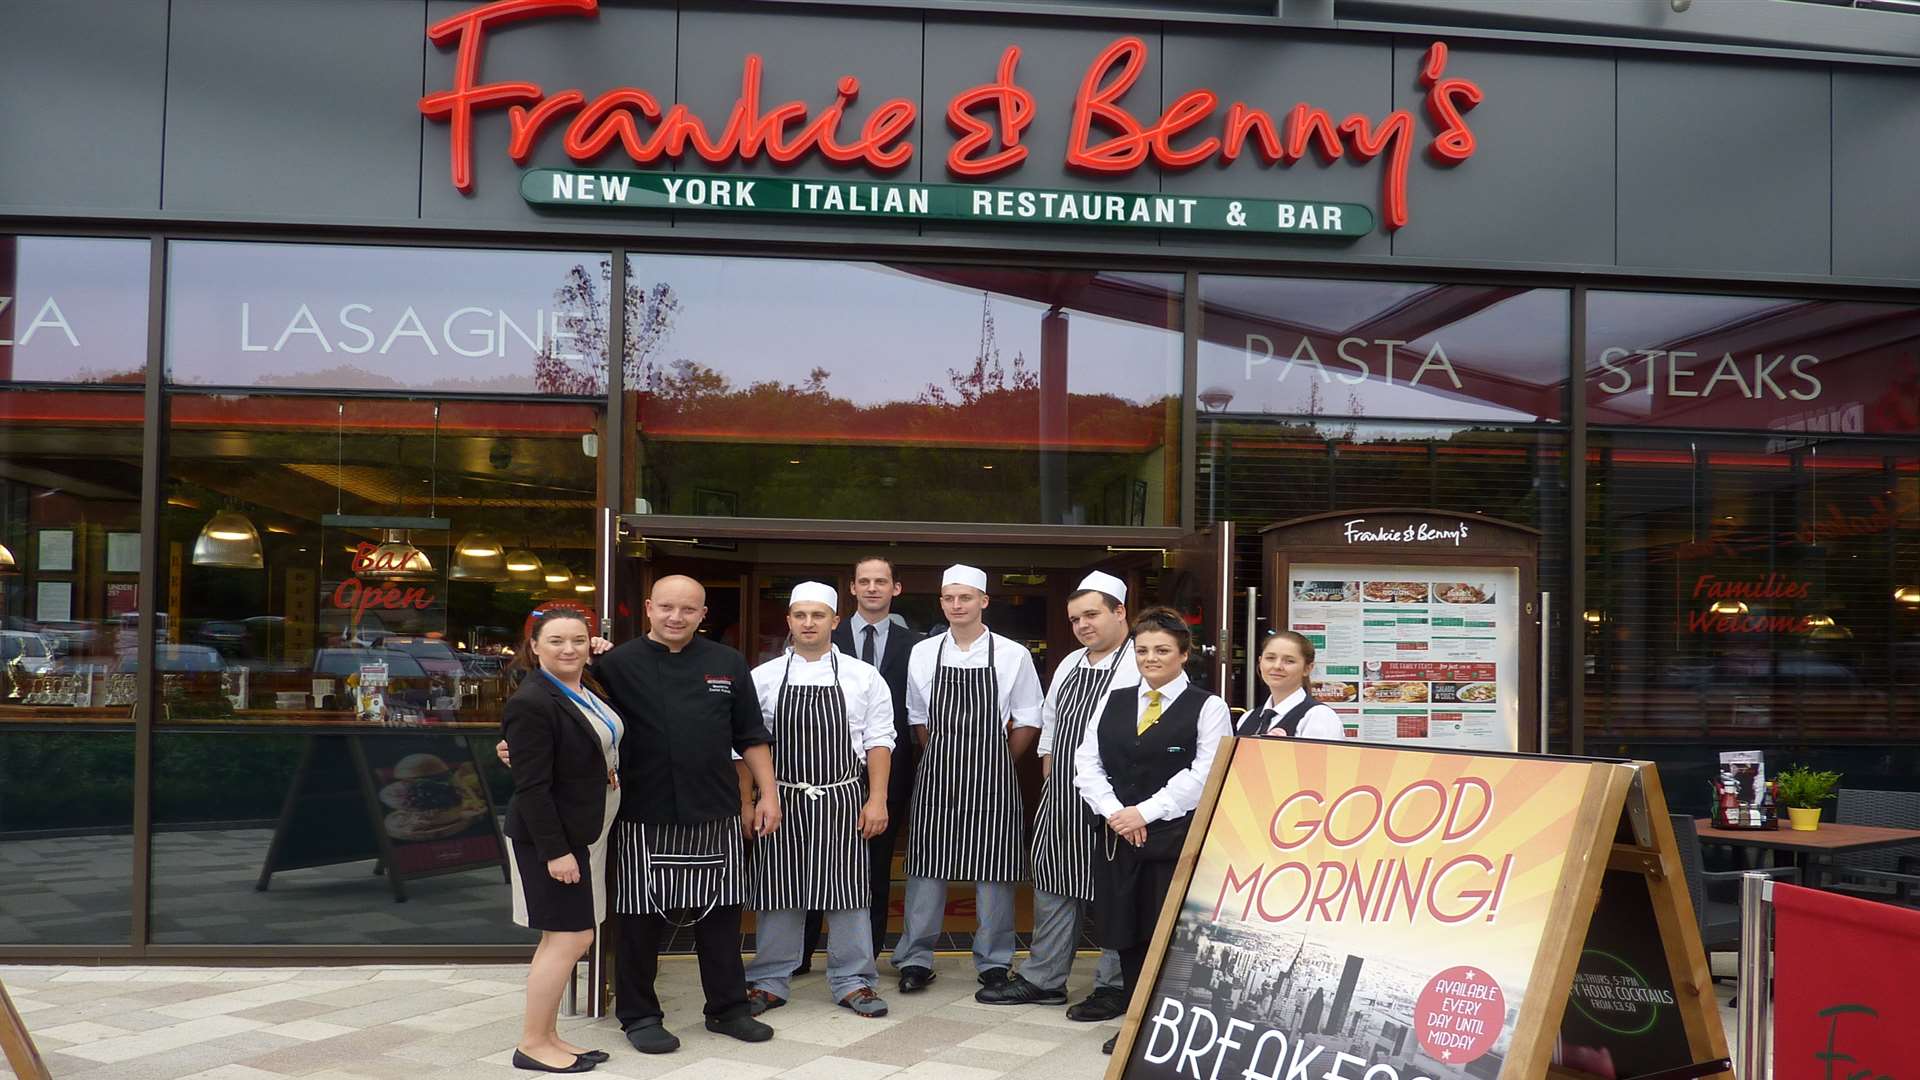 Frankie and Benny's is now open at Hempstead Valley